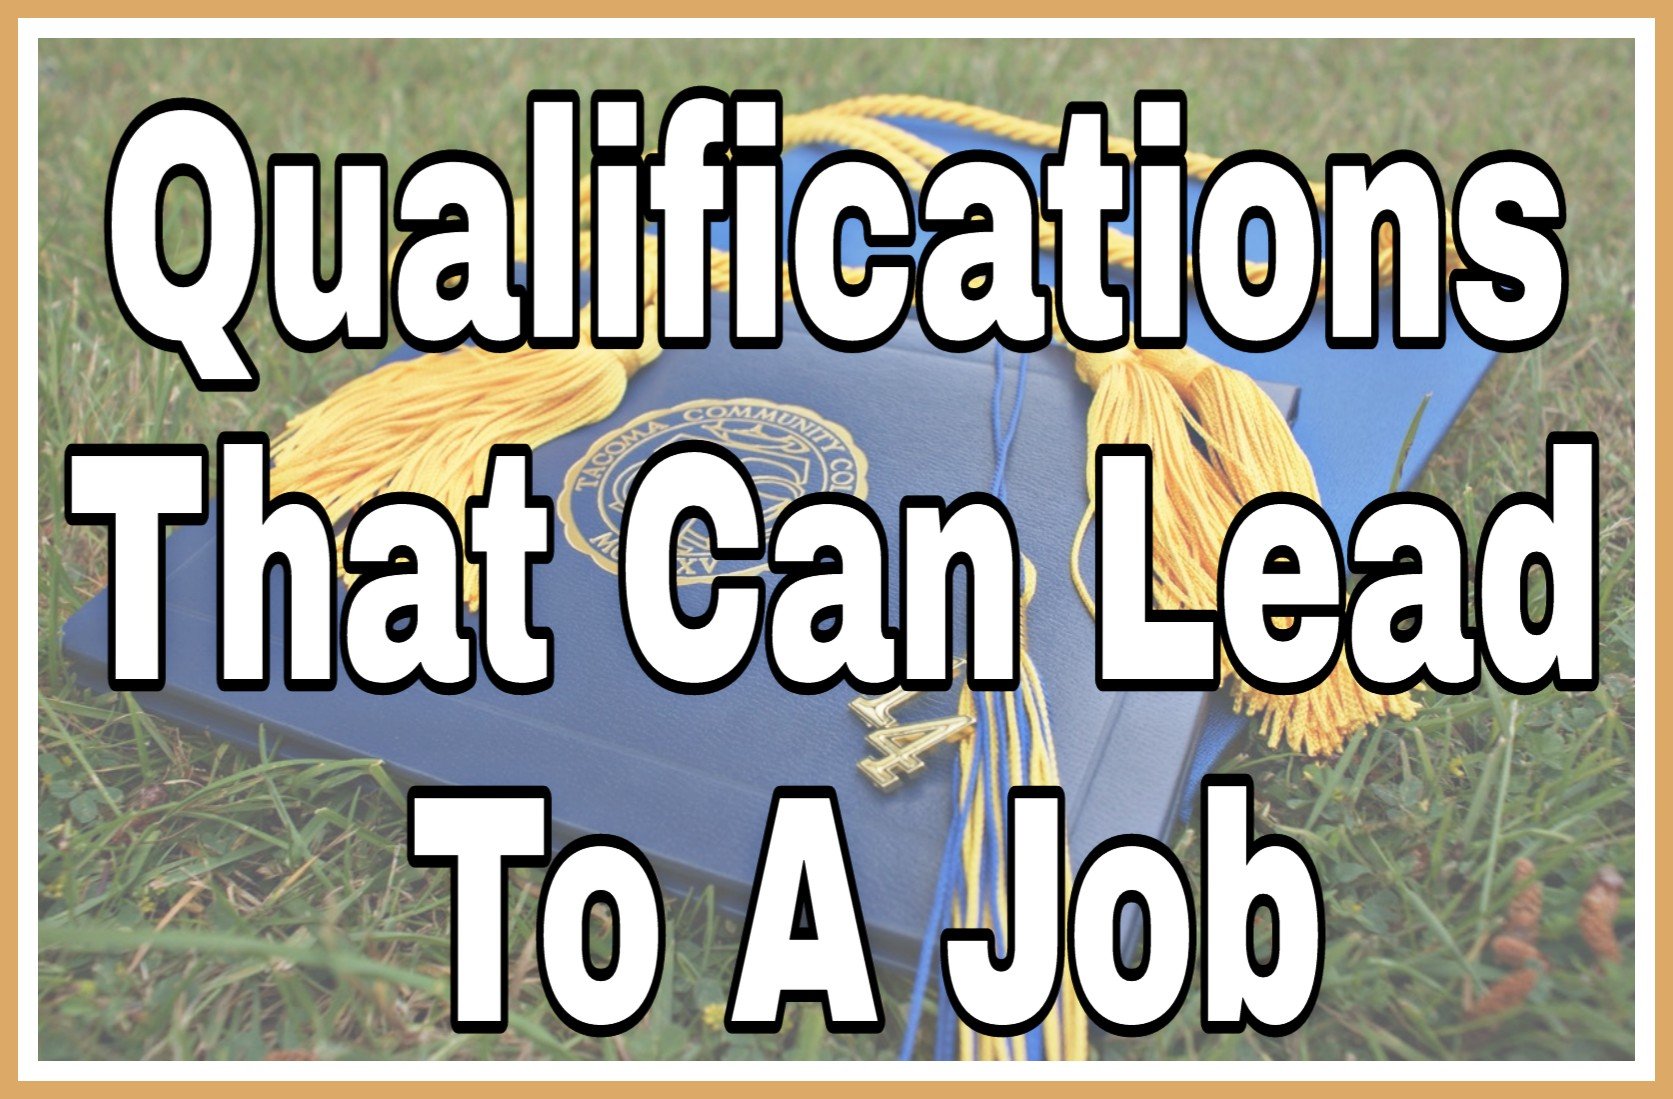 Qualifications That Can Lead To A Job title on faded background image of graduation robes.